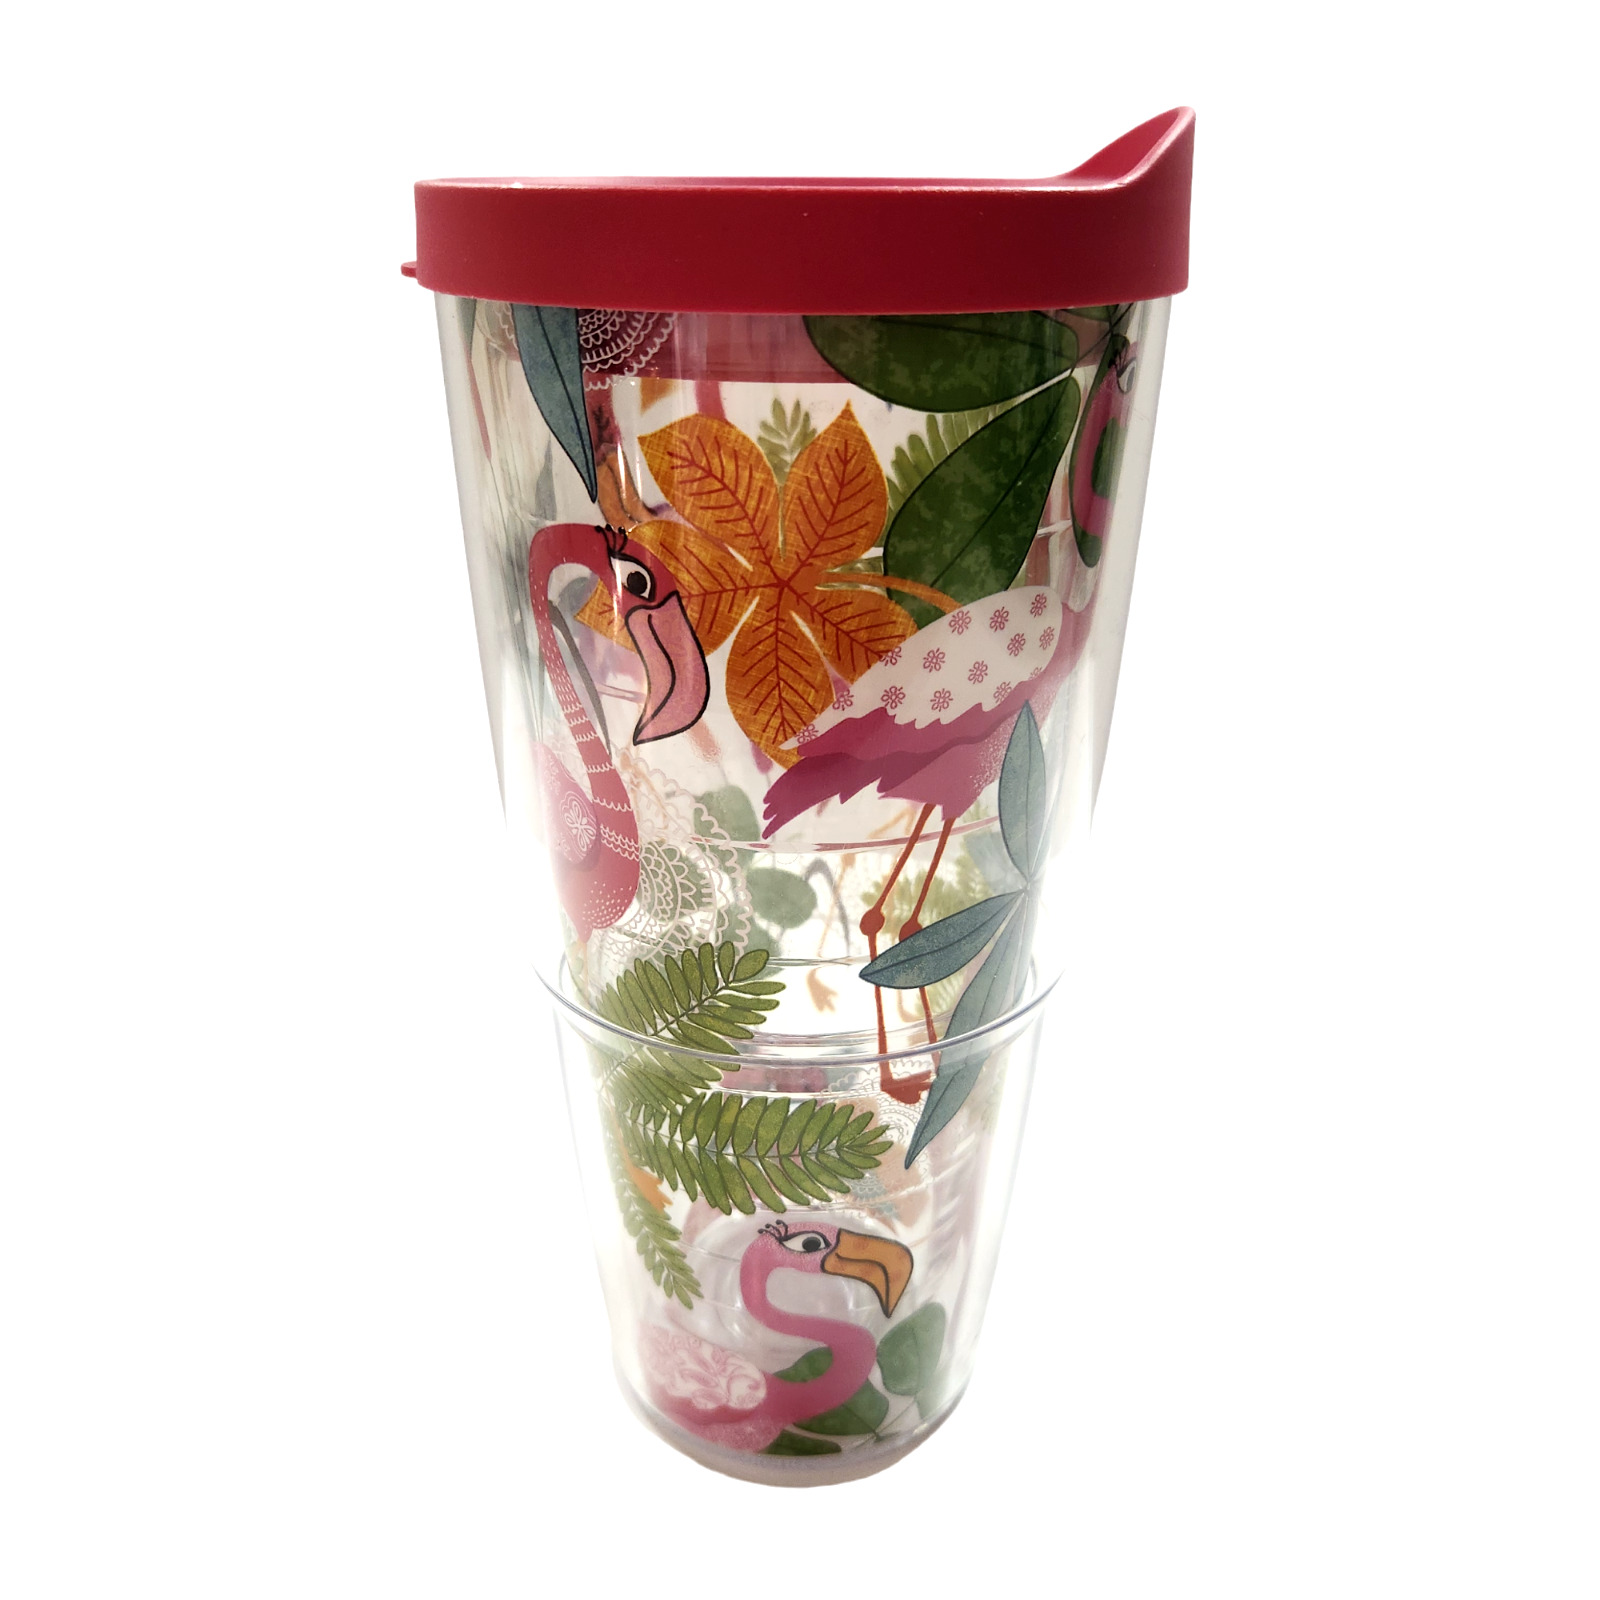 Tervis Pink Flamingo Plastic Drink Tumbler Cup with Lid 24 oz Great Condition